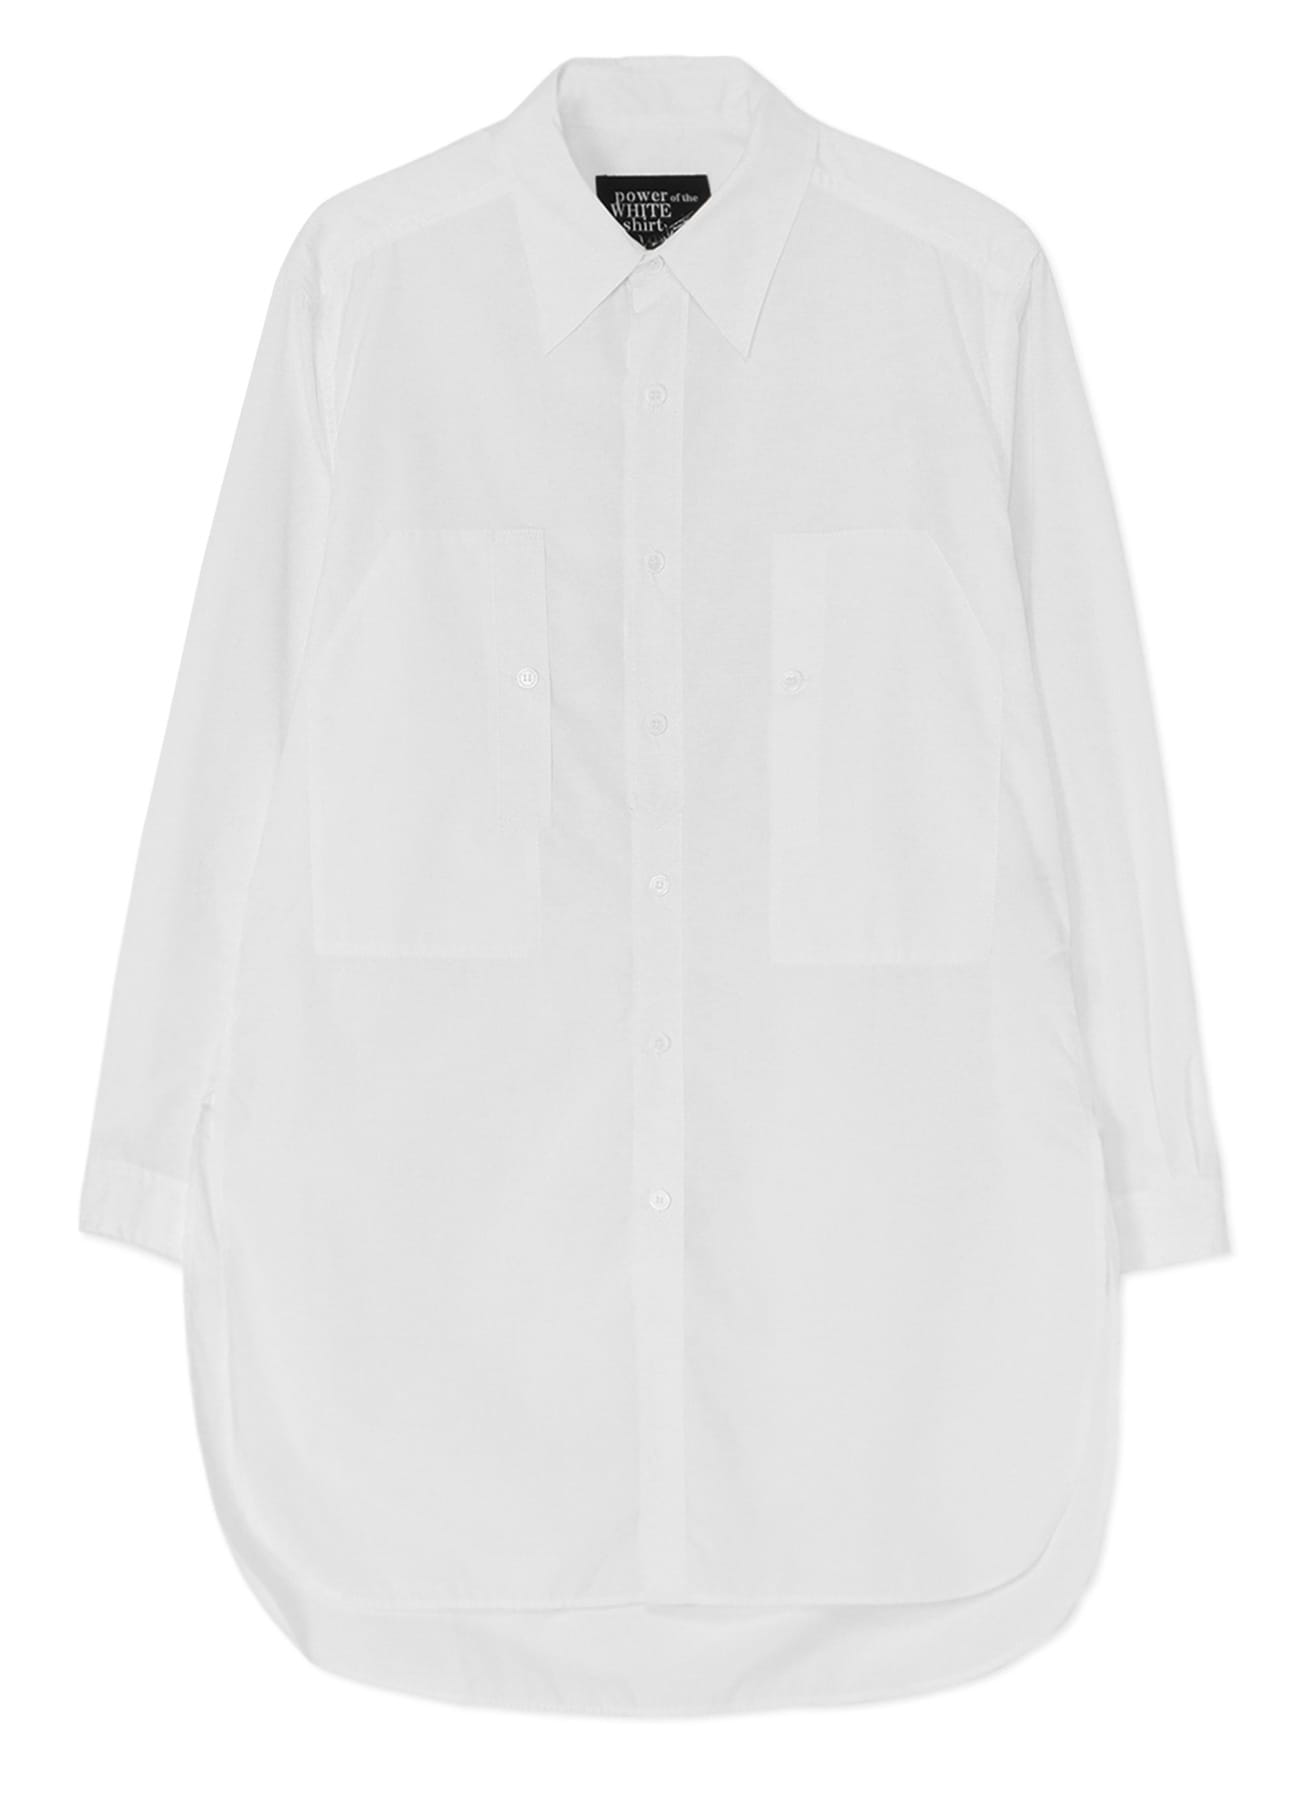 COTTON BROADCLOTH ROUNDED HEM DOUBLE CHEST POCKET SHIRT